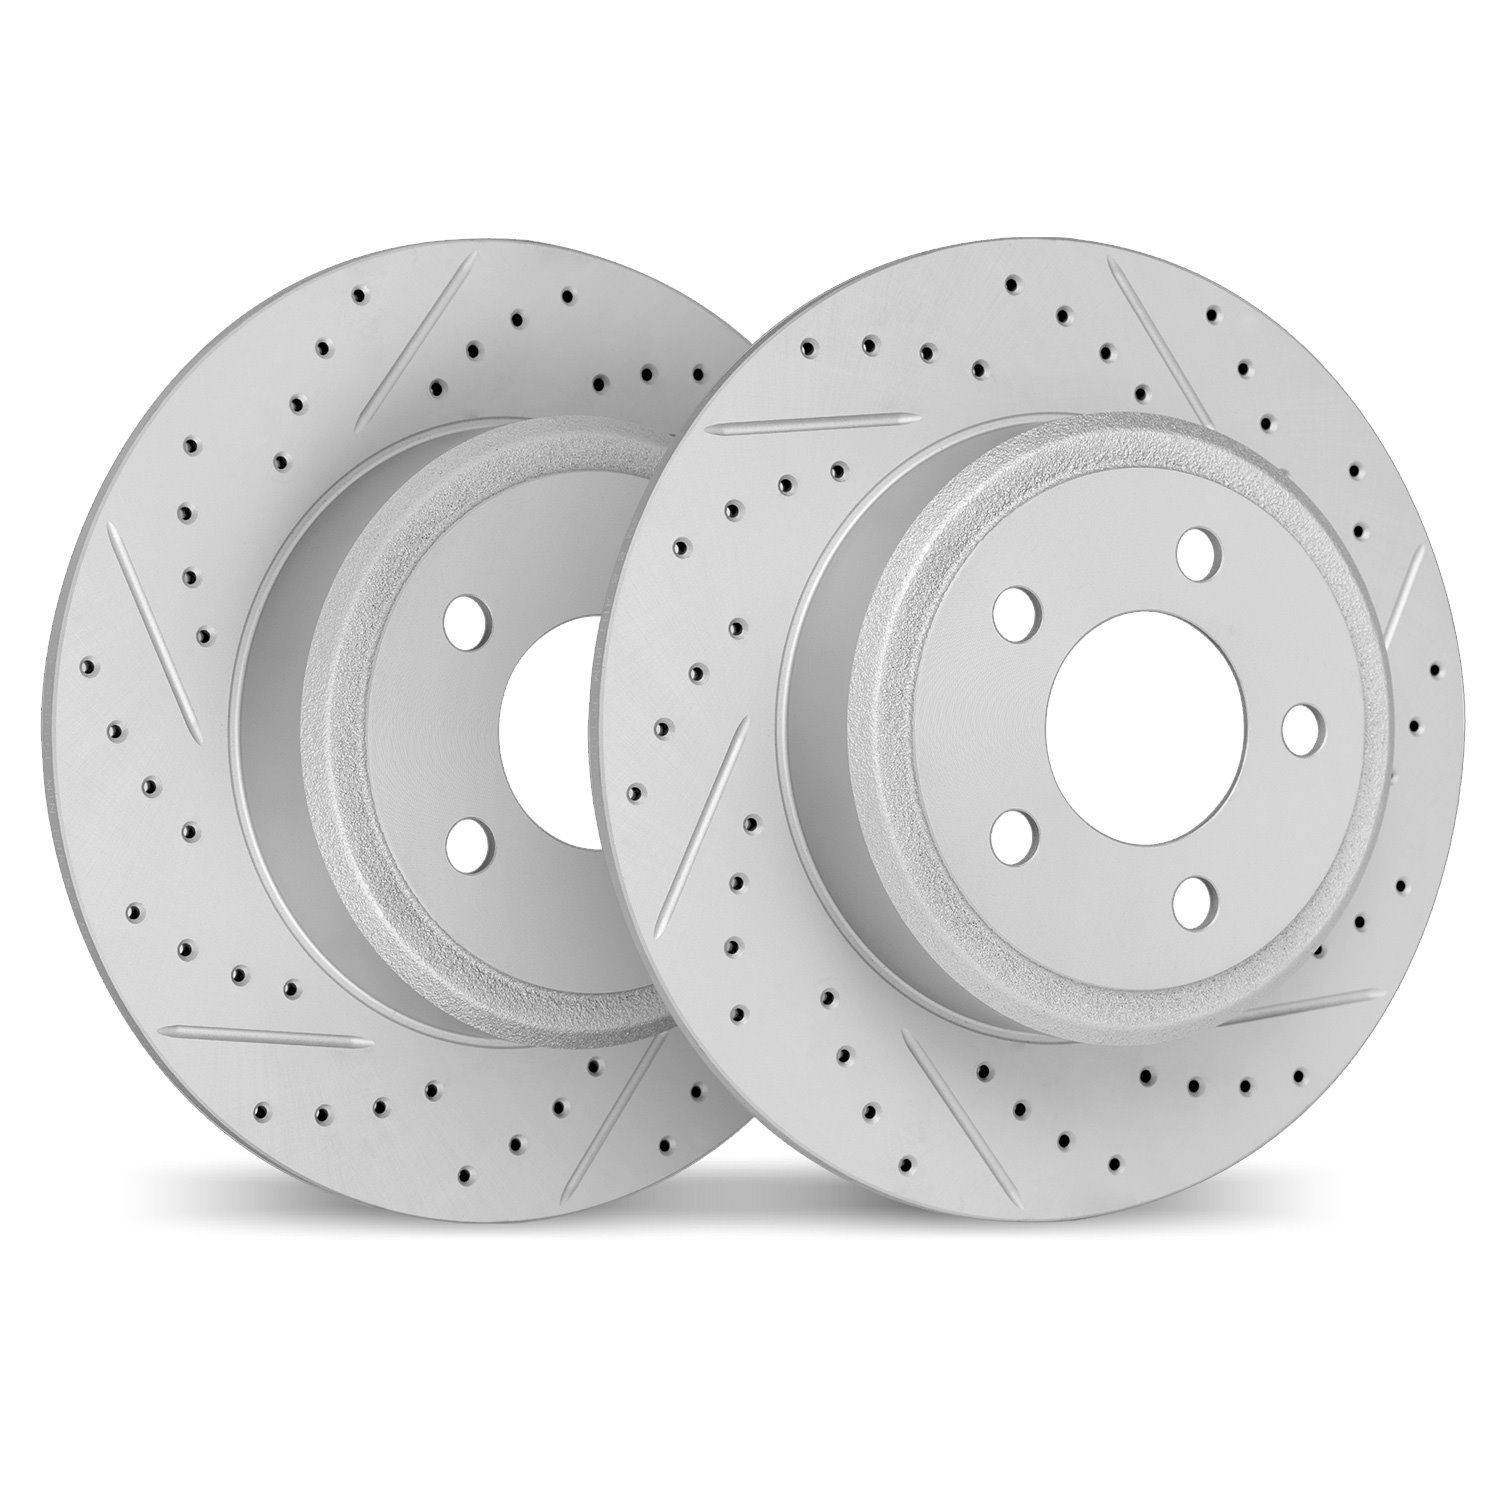 2002-76056 Geoperformance Drilled/Slotted Brake Rotors, 1995-1999 Lexus/Toyota/Scion, Position: Rear